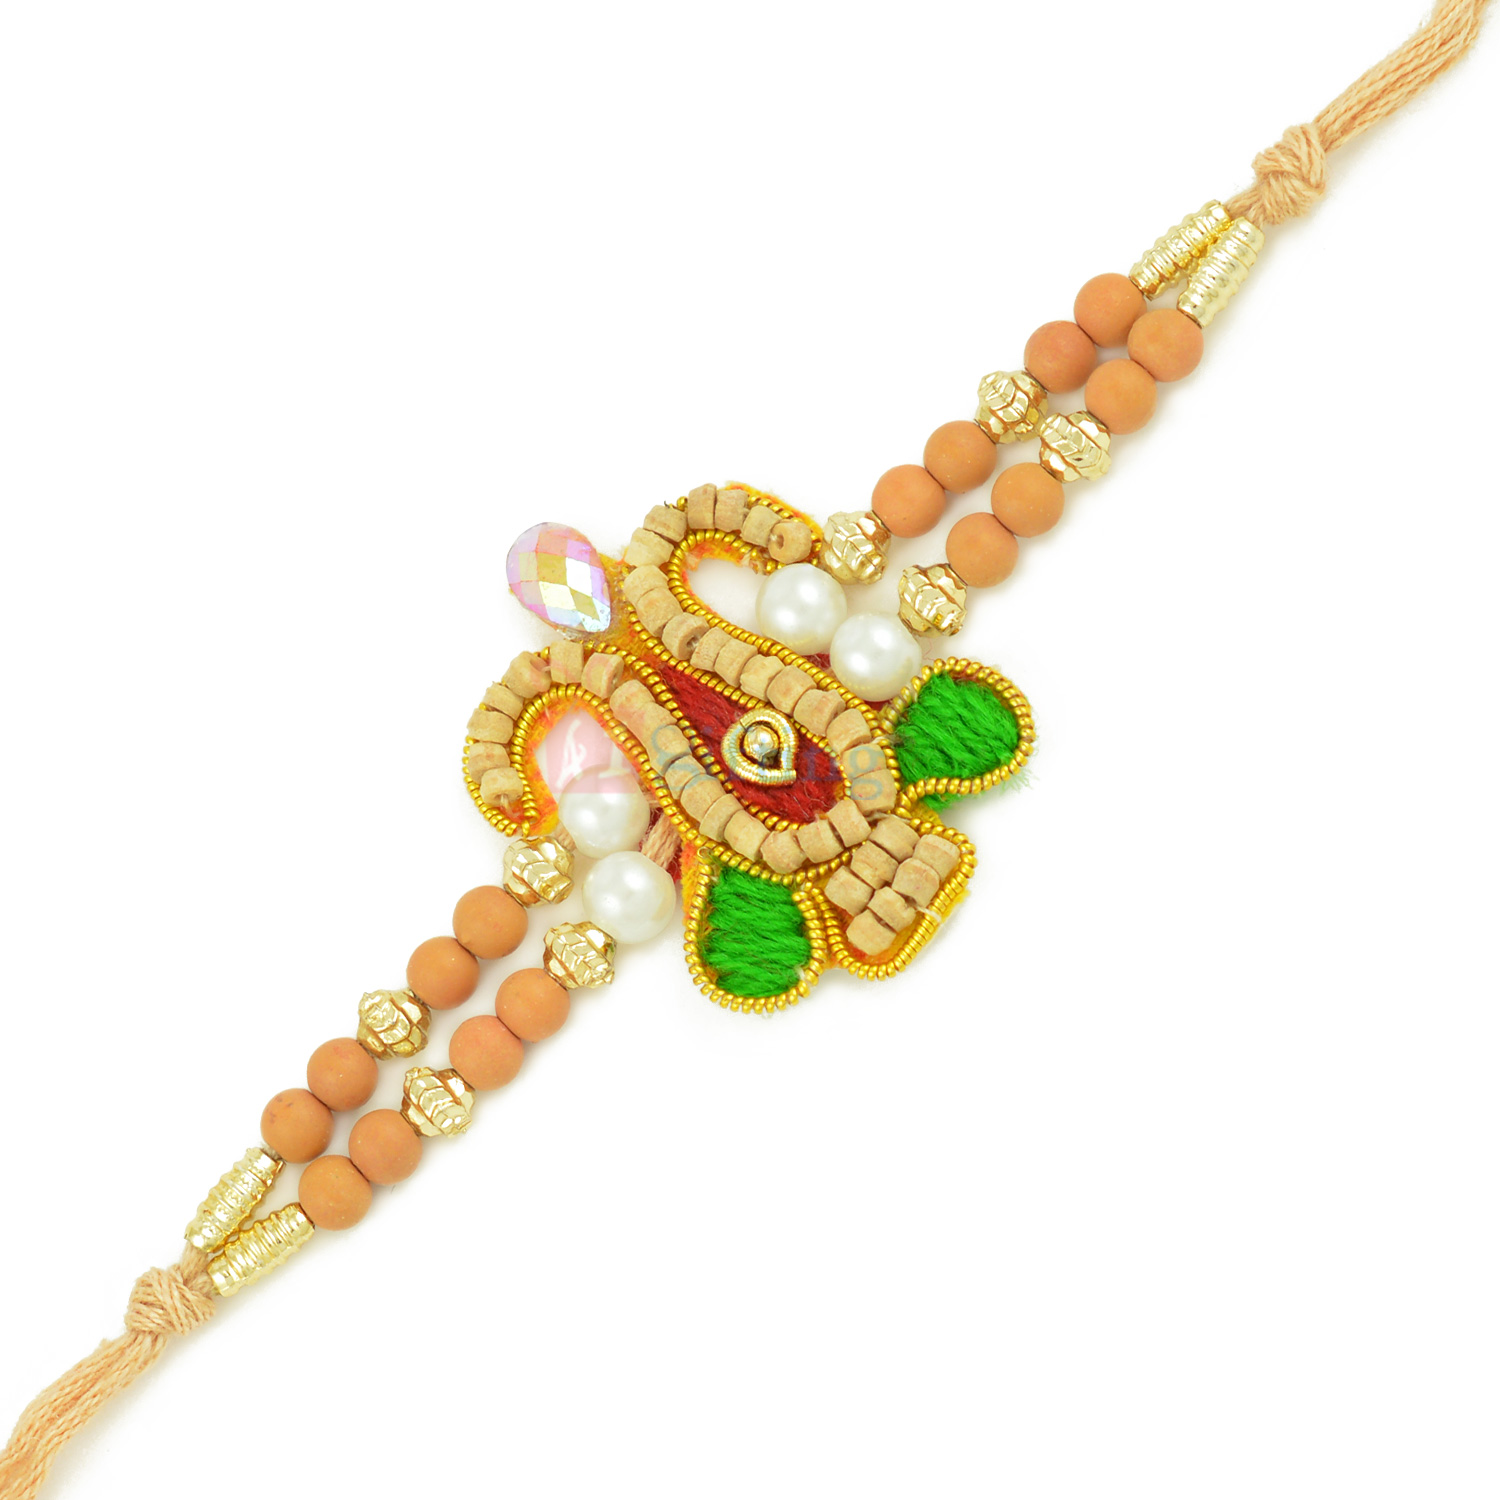 Elegant and Exclusive Golden and Beads Rakhi for Bhaiya